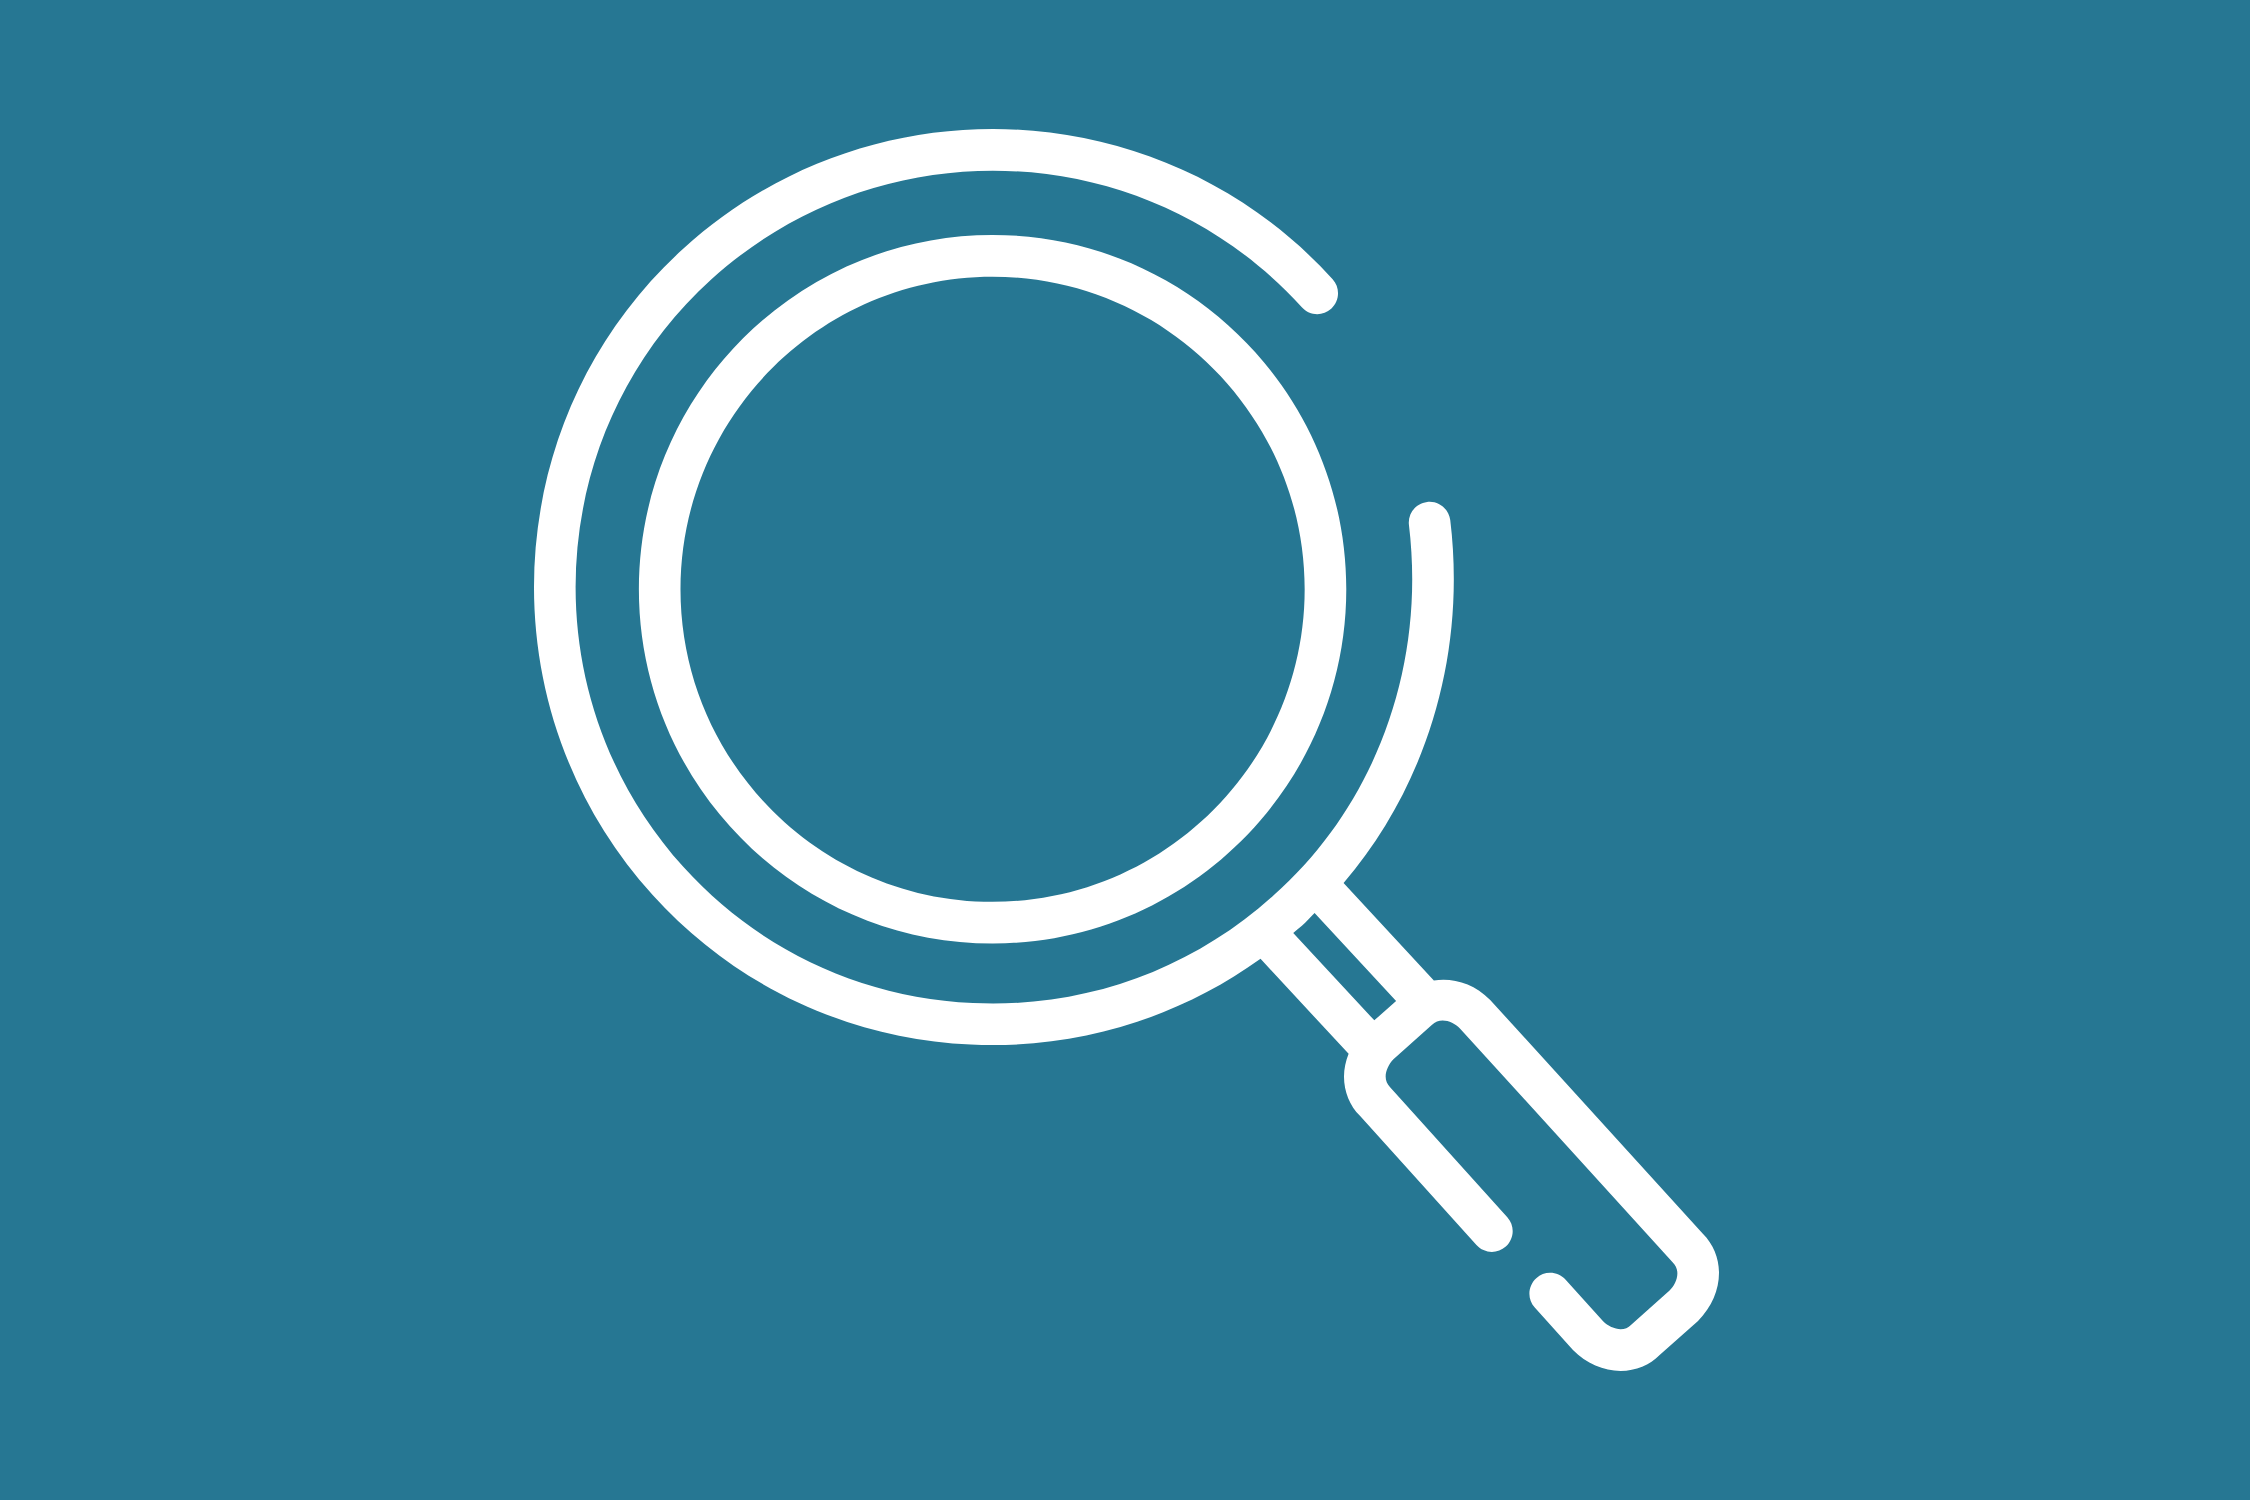 Icon of magnifying glass